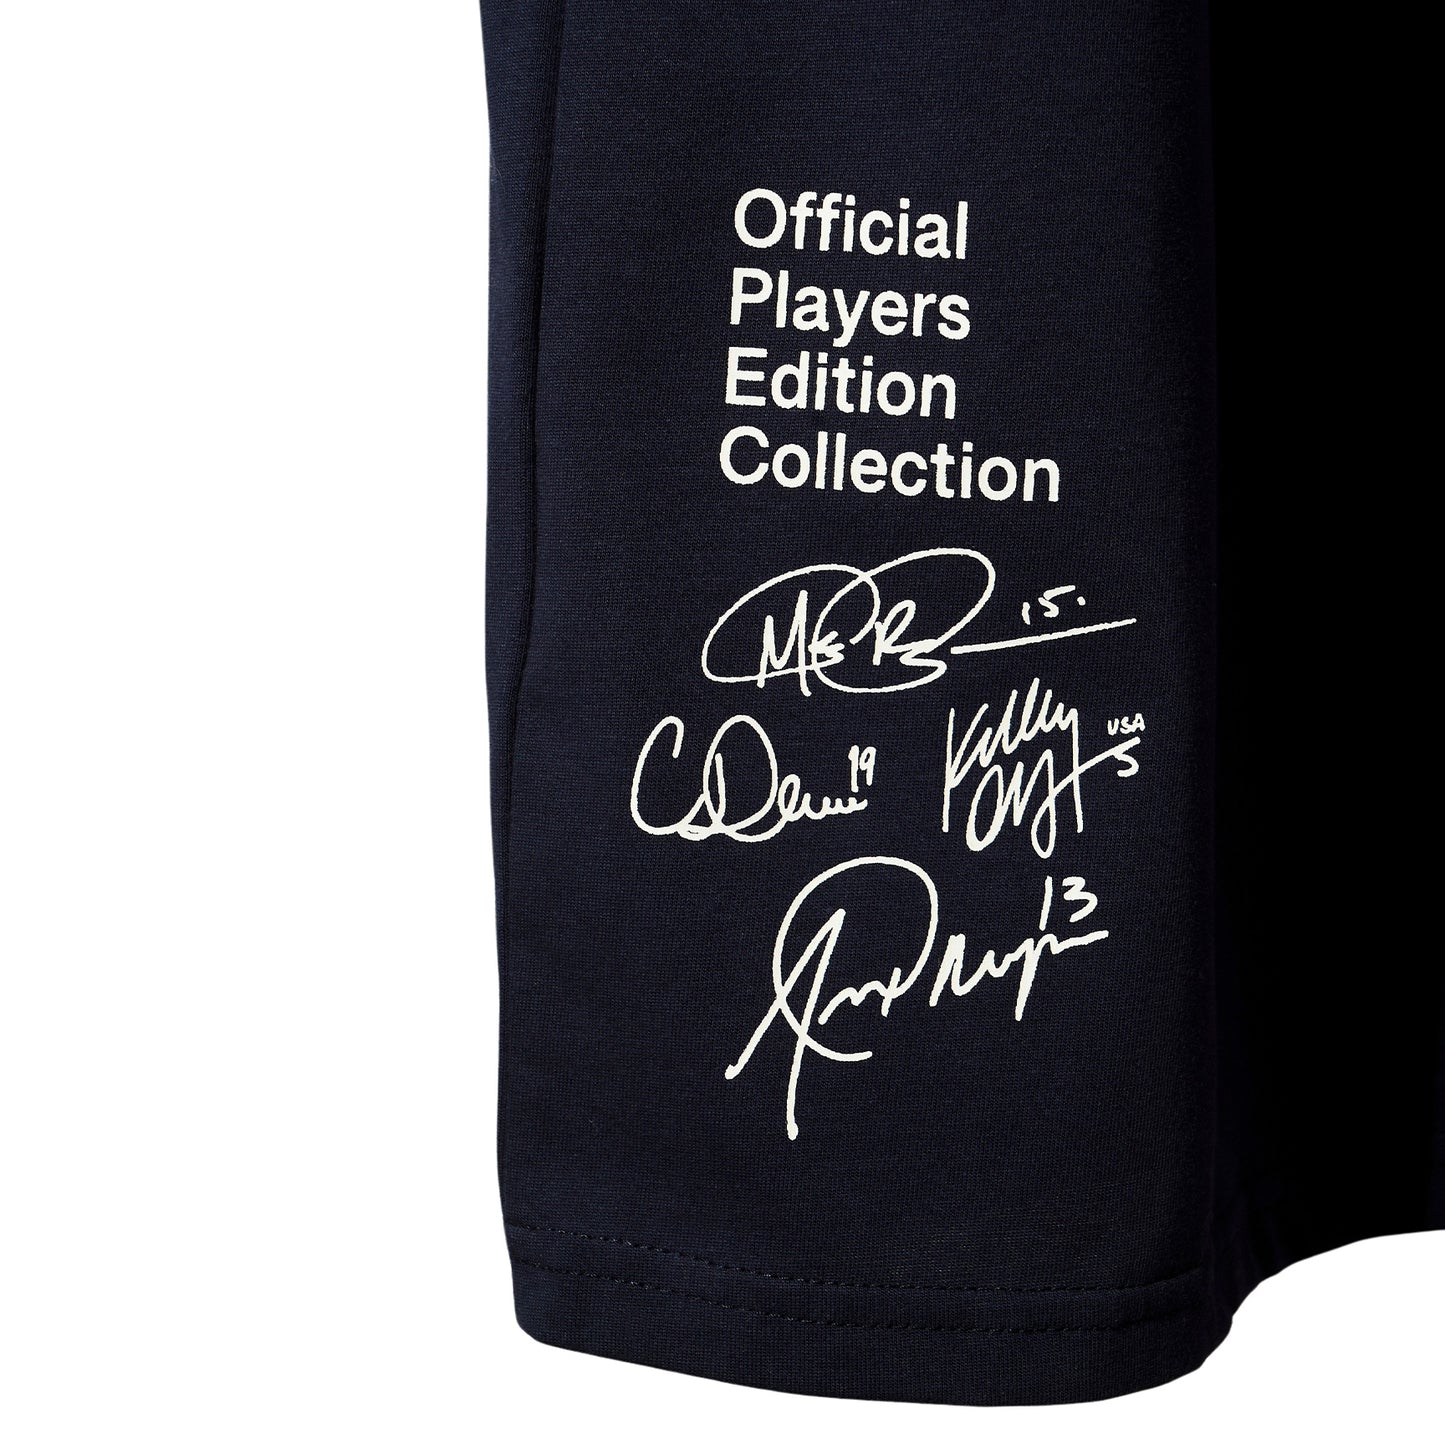 Official USWNT Players Association Tee